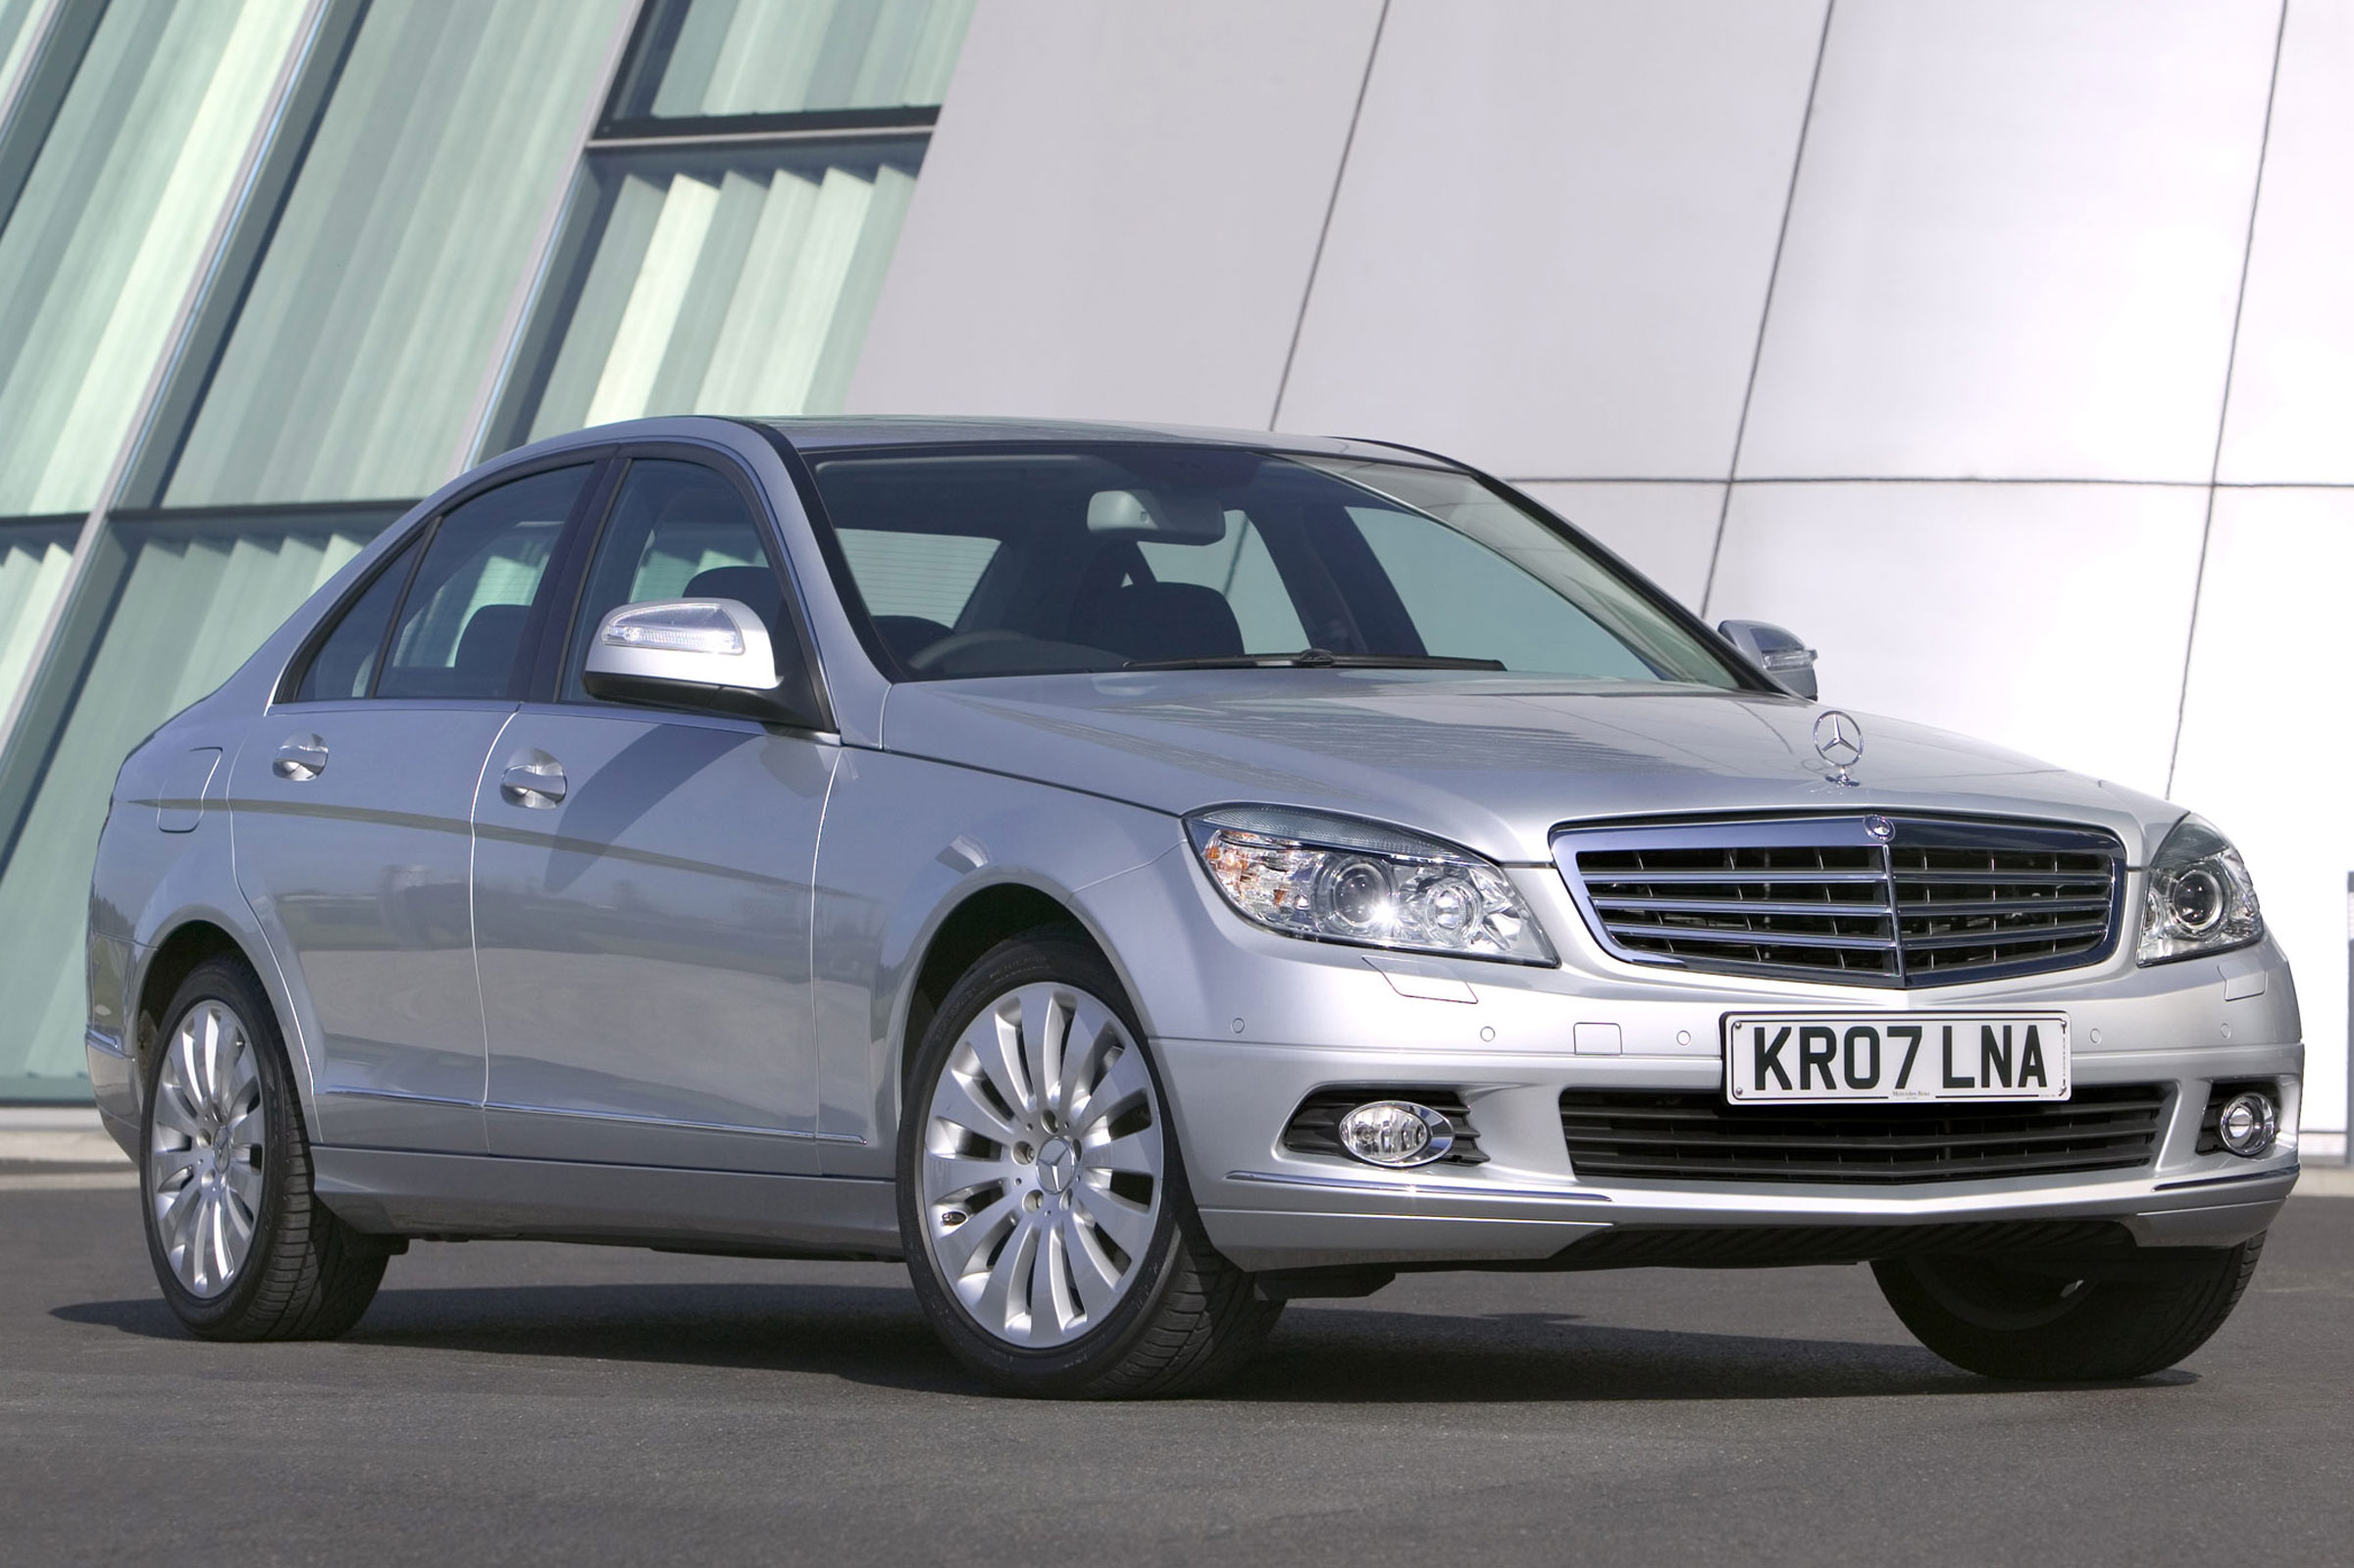 Reasons to Buy a W204 Mercedes C-Class